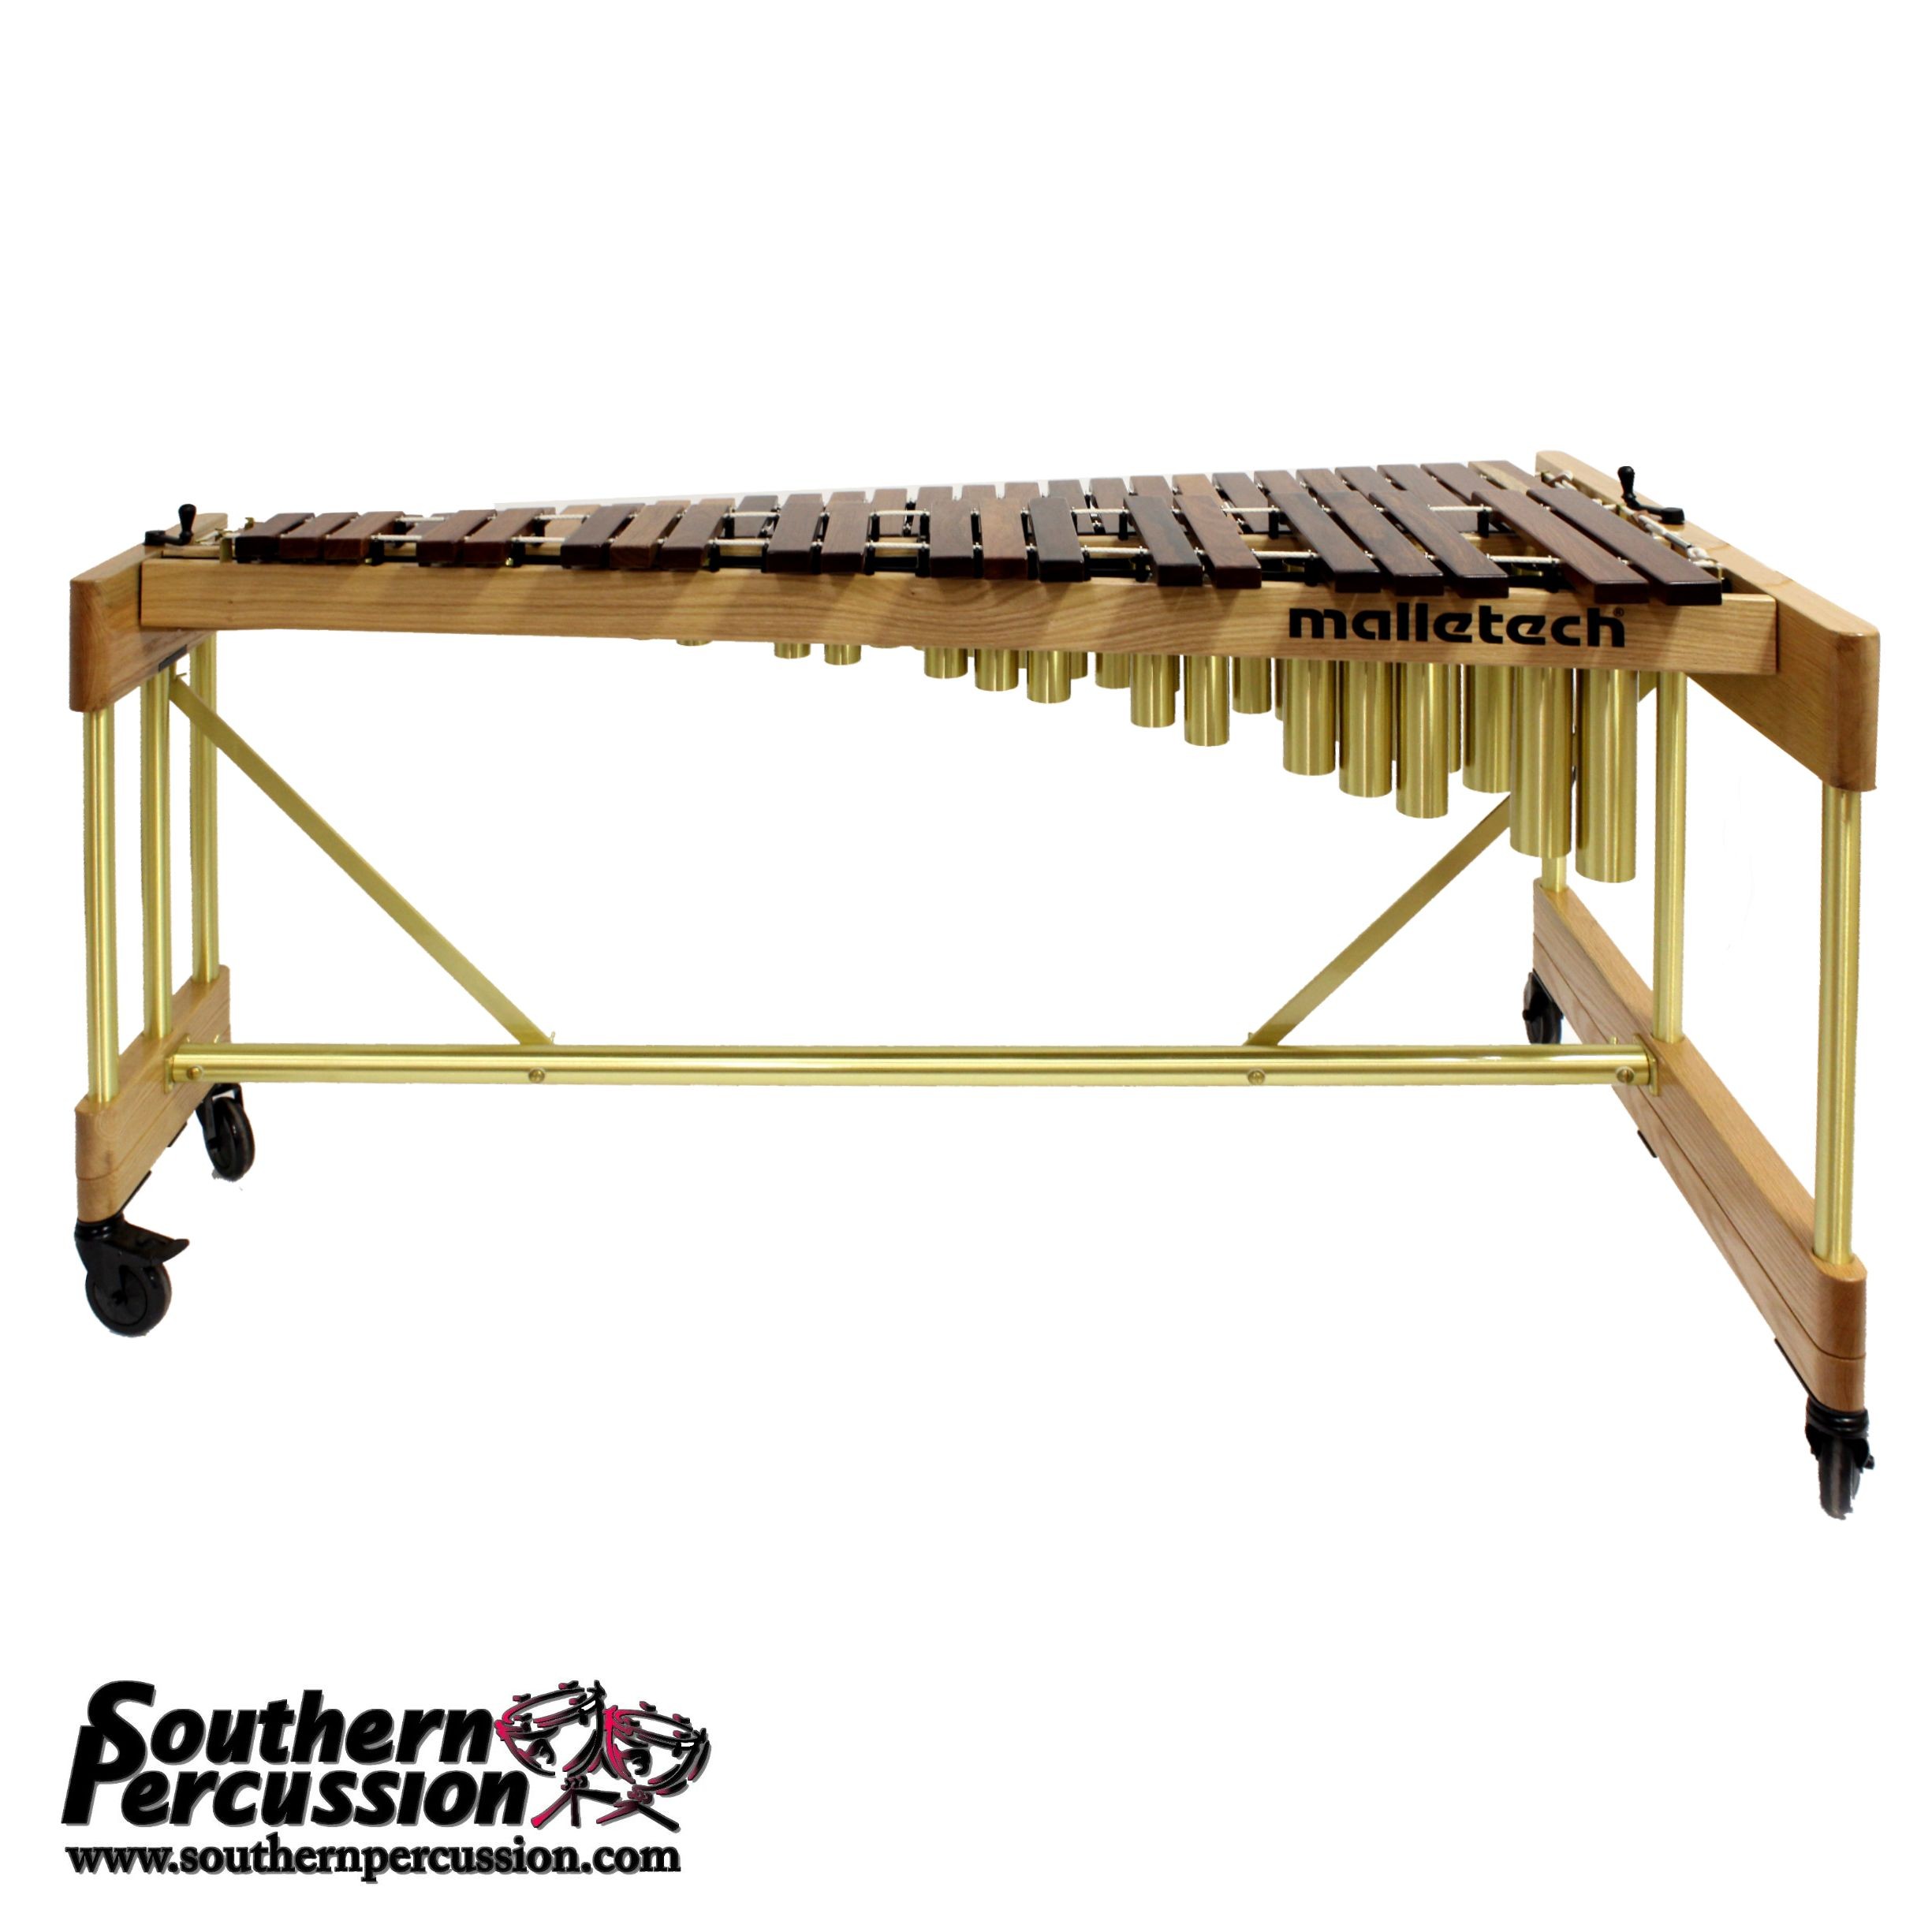 Malletech Orchestral 4oct Xylophone